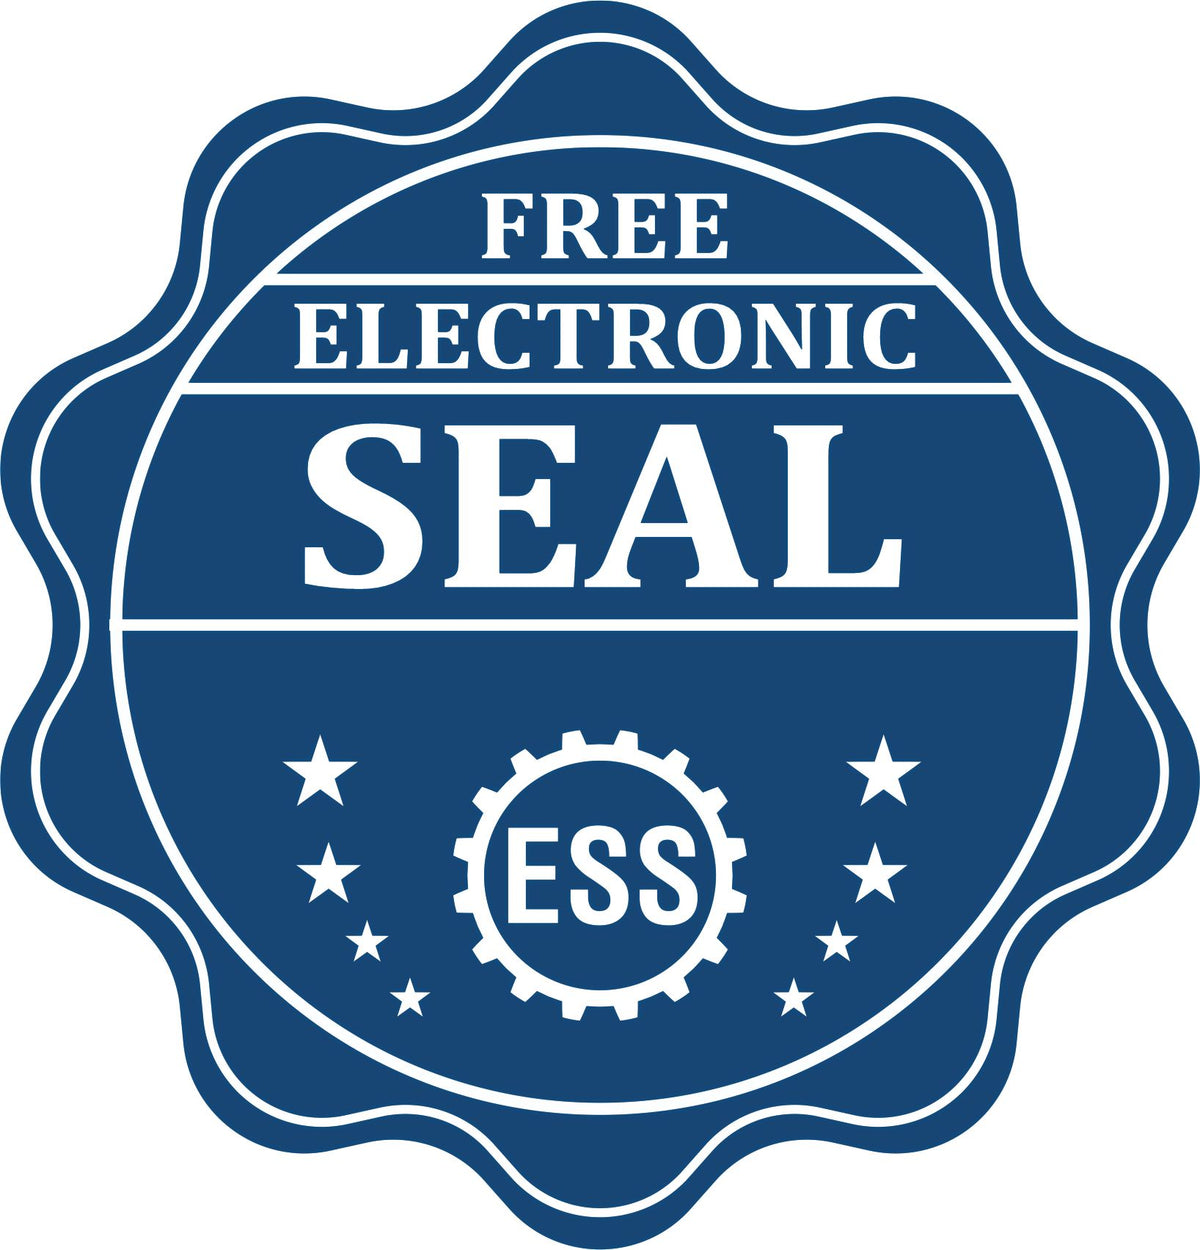 A badge showing a free electronic seal for the Long Reach Wisconsin Geology Seal with stars and the ESS gear on the emblem.